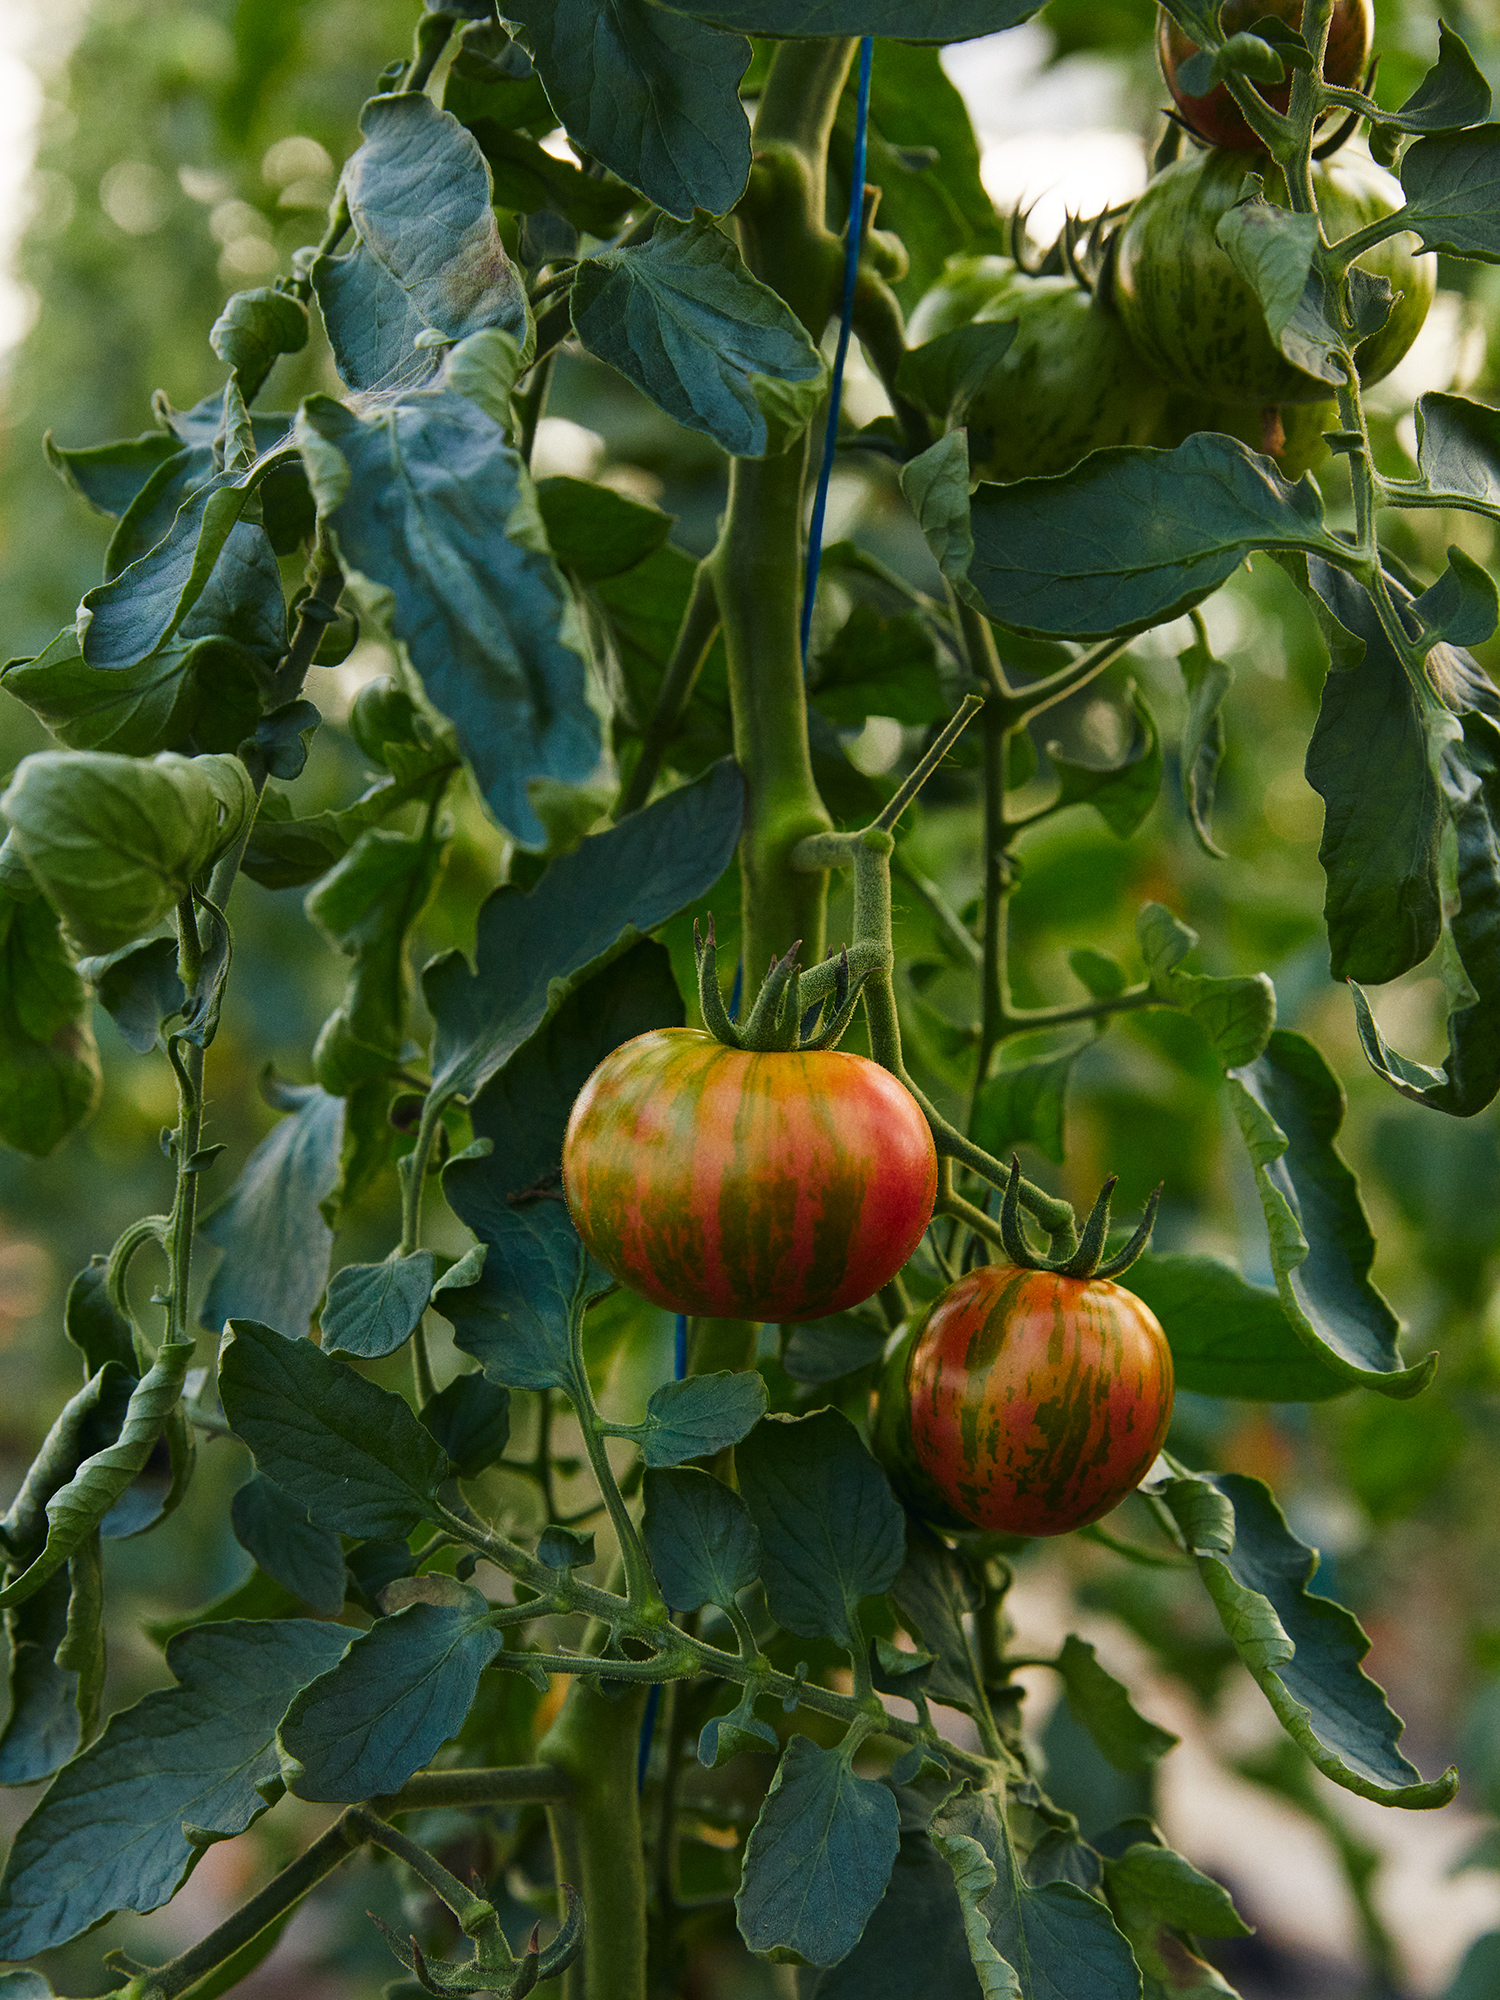 Red and green striped tomatoes on a green vine